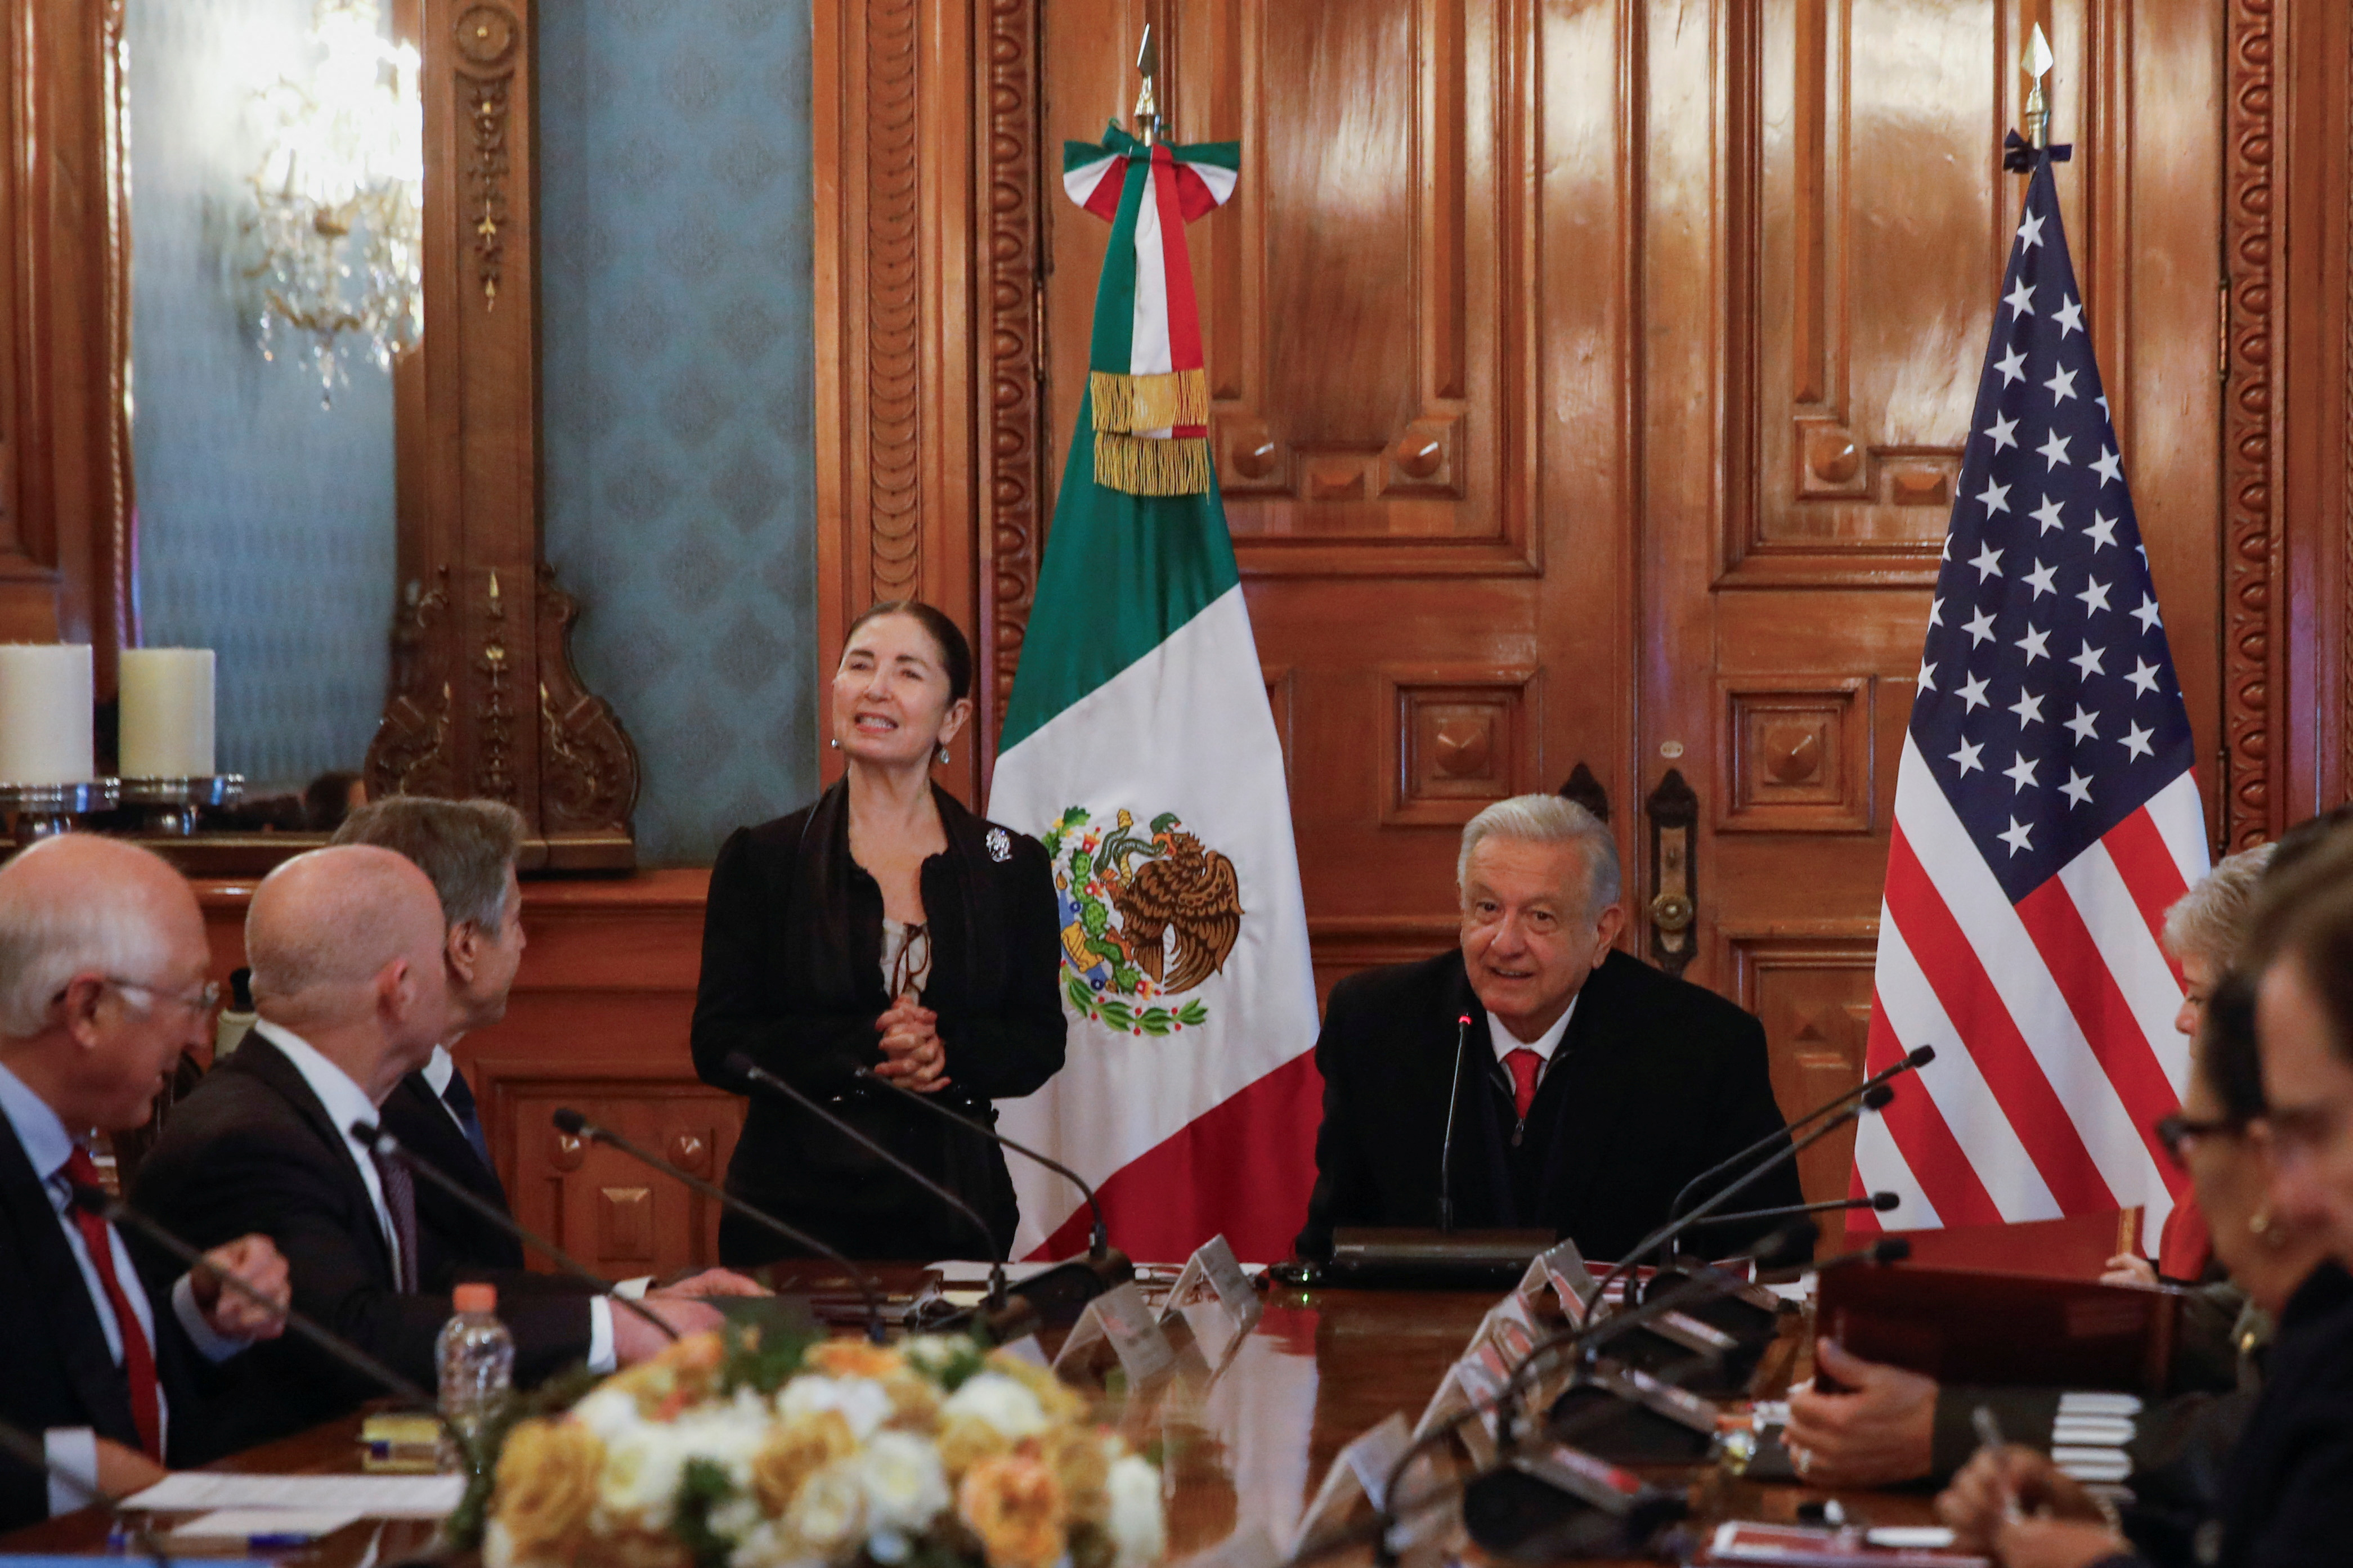 U.S. Secretary of State Blinken and U.S. Secretary of Homeland Security Mayorkas attend a meeting in Mexico City